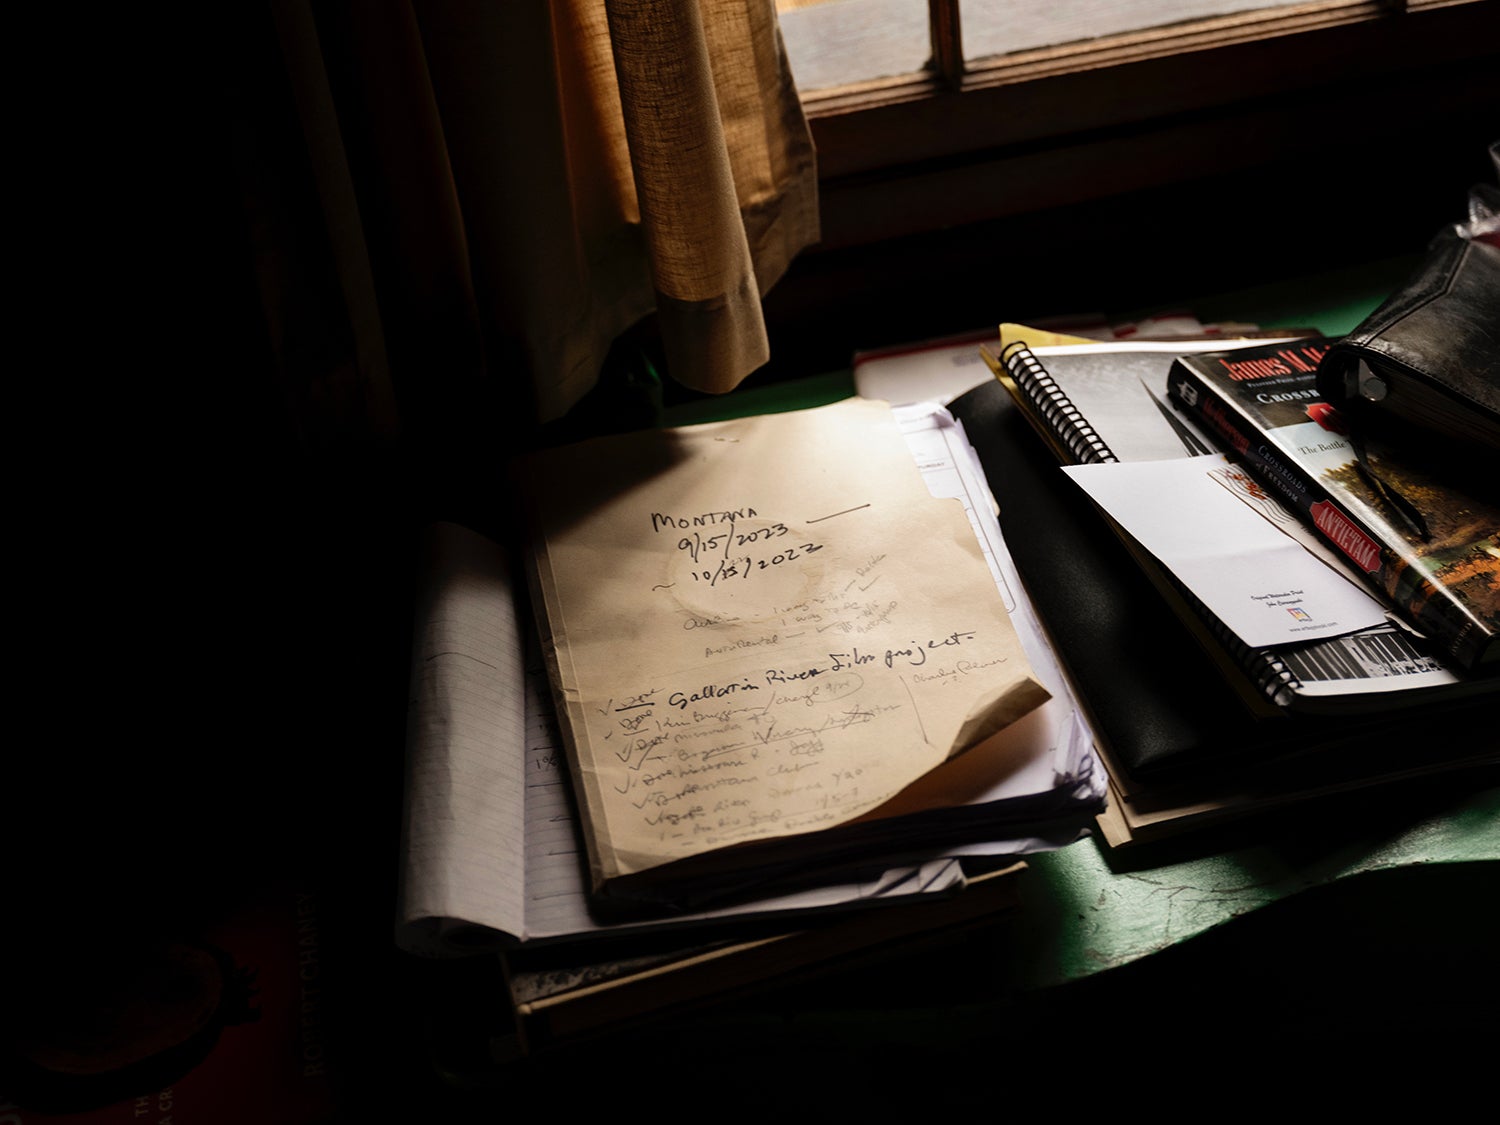 A collection of books and papers rests on a desk inside a dark cabin.